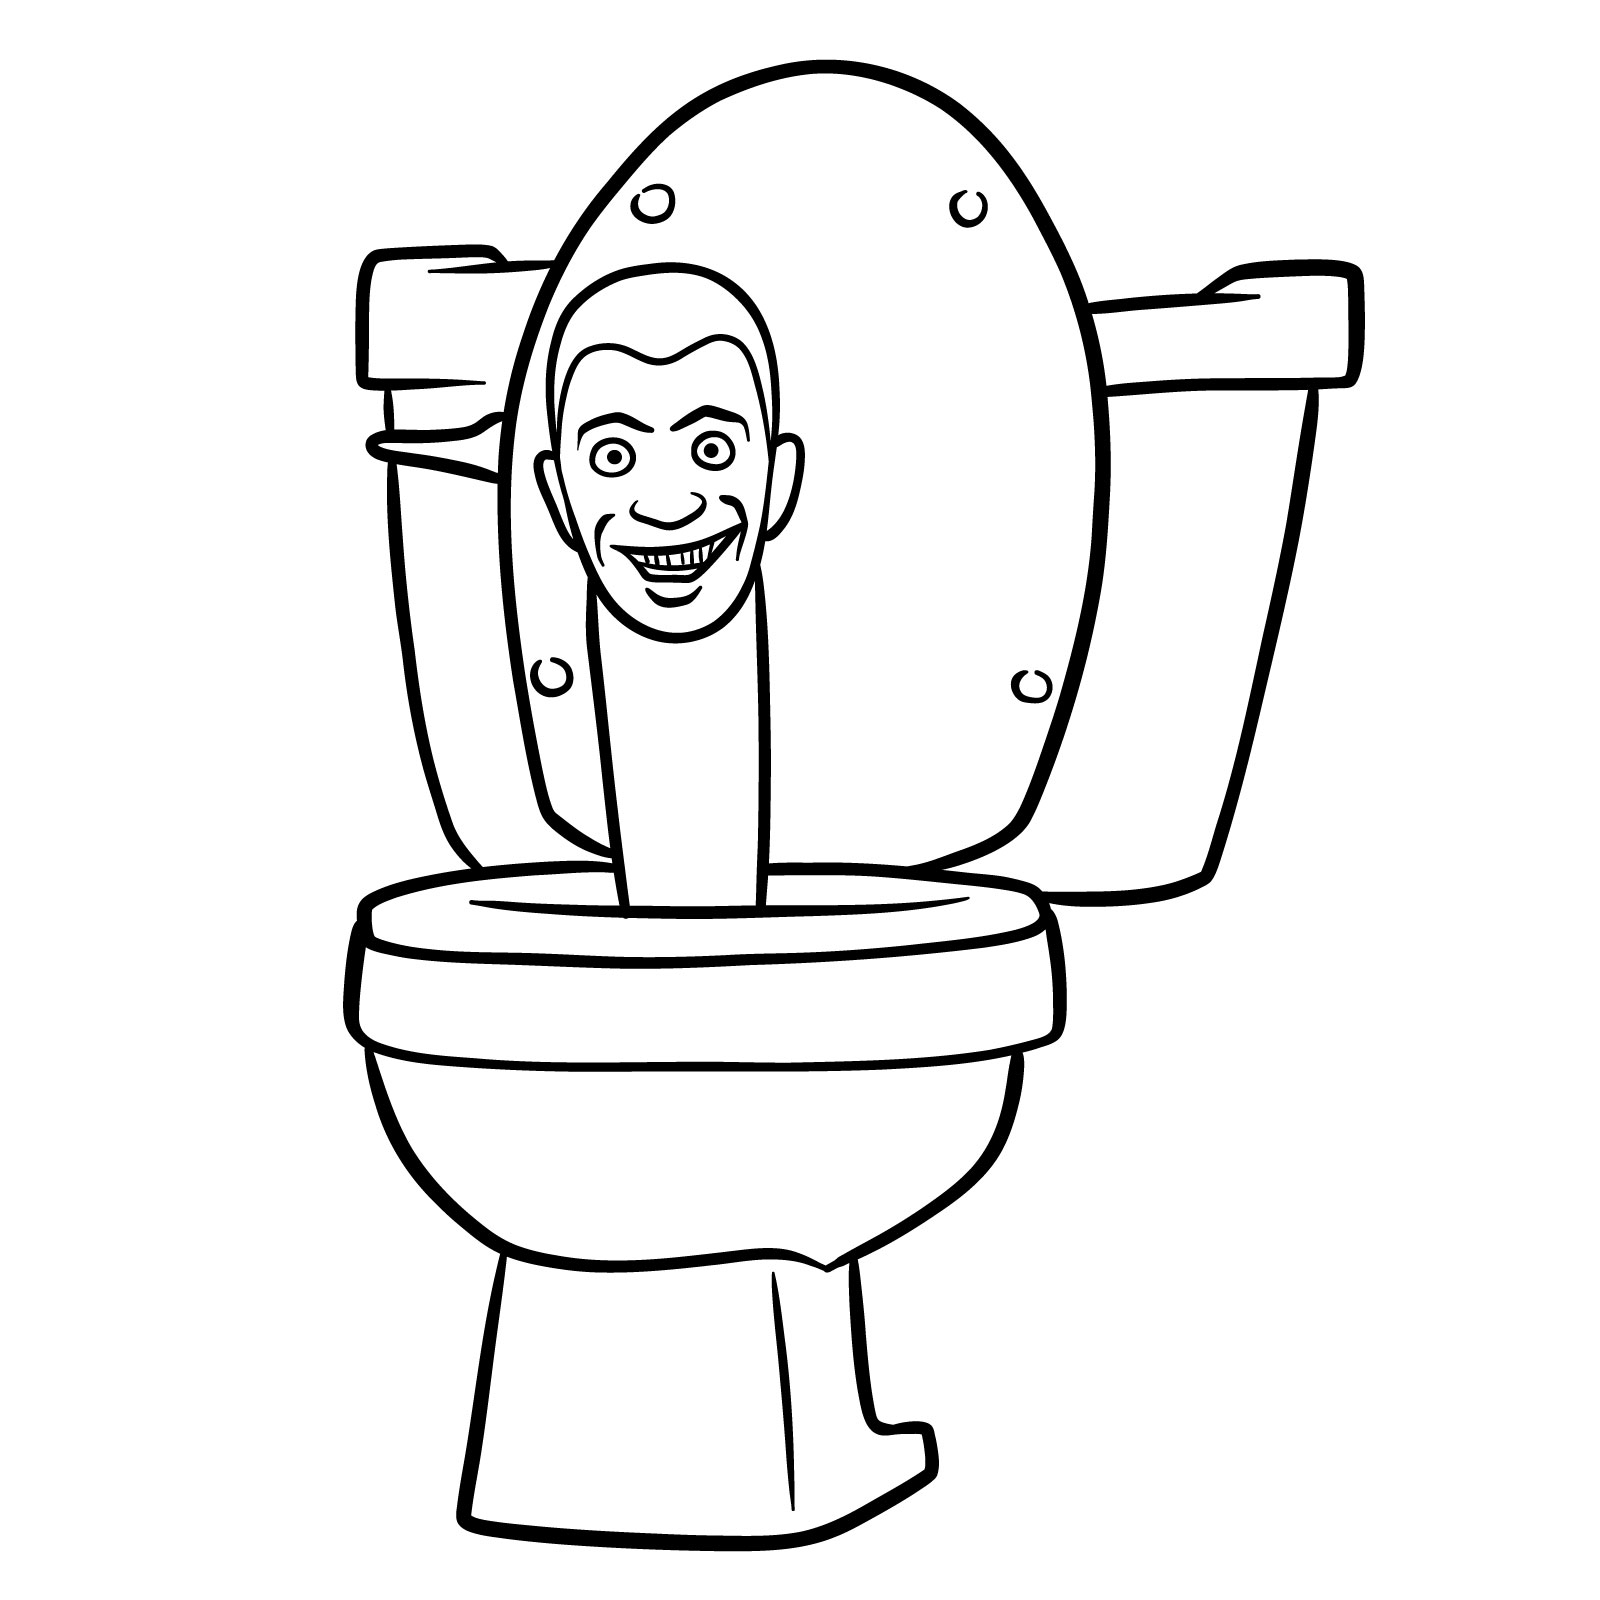 Complete Skibidi Toilet drawing - final step